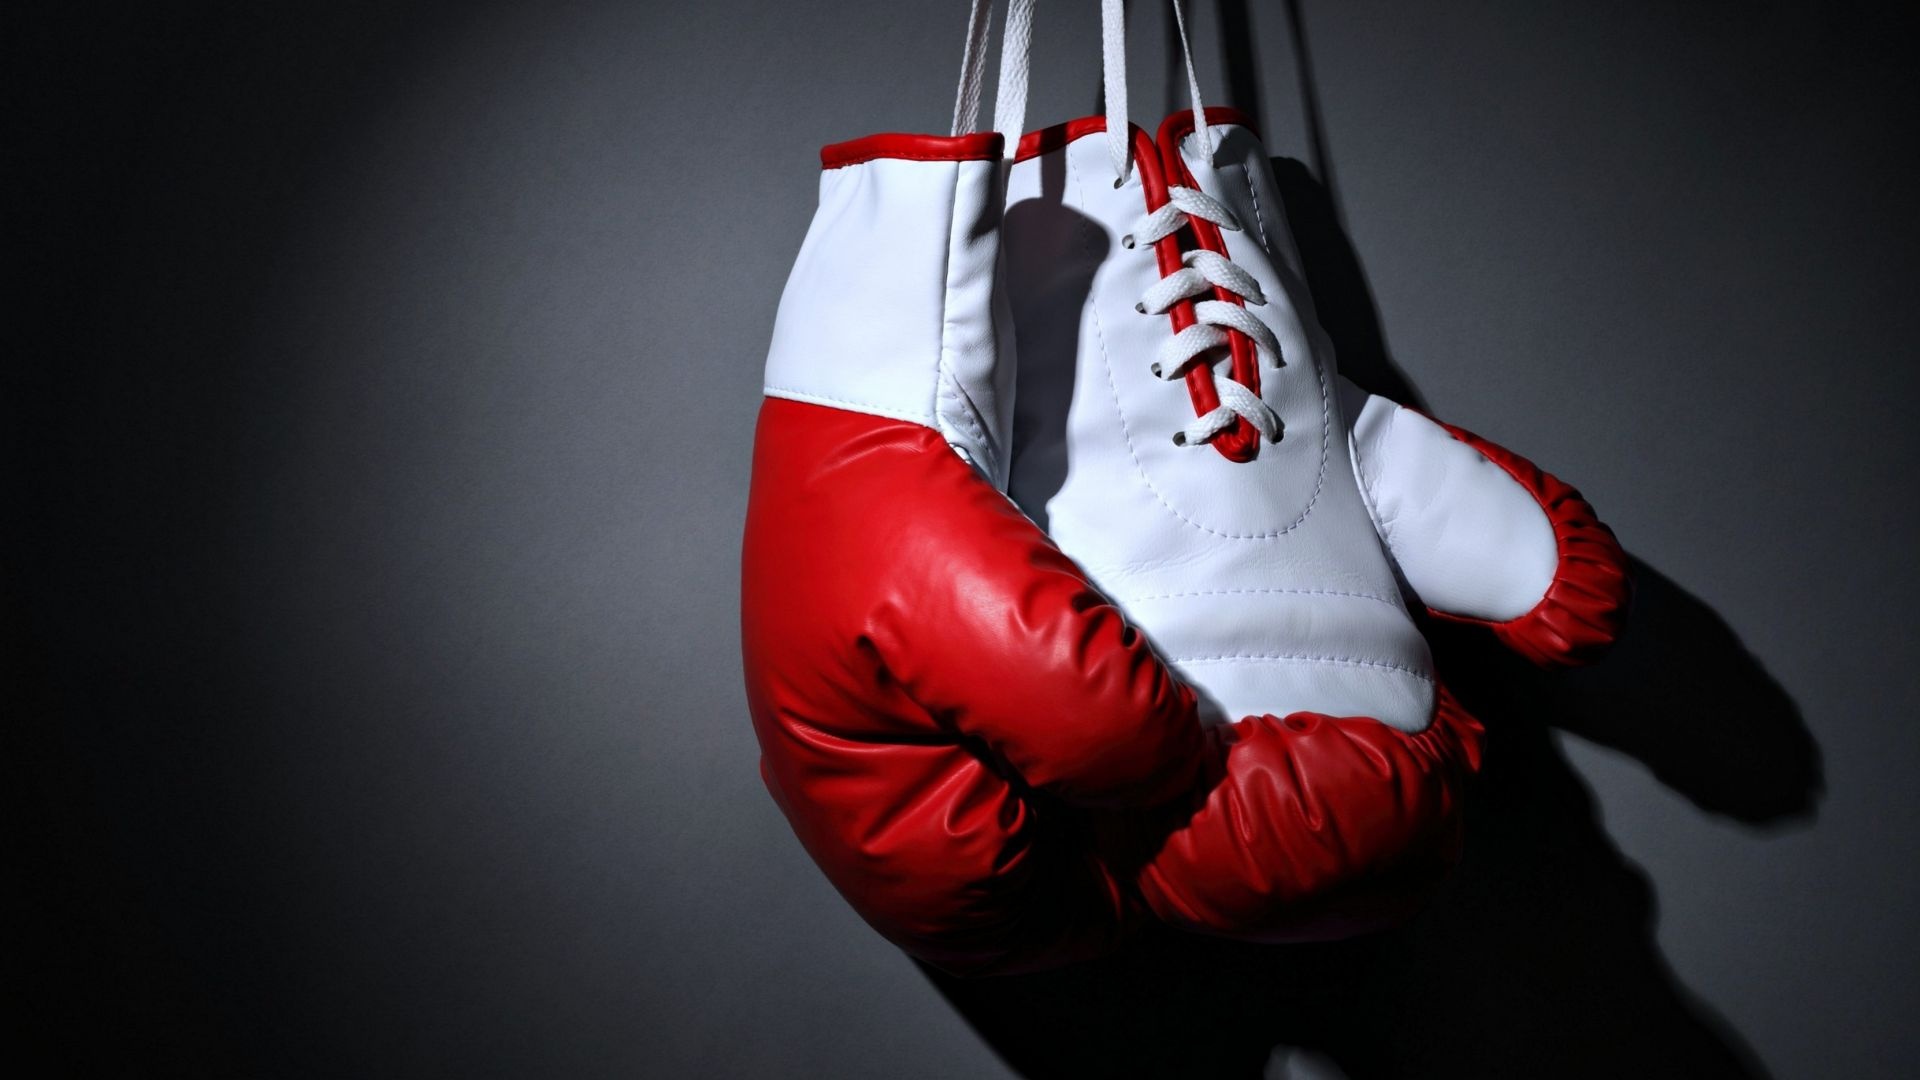 Boxing glove, Sports wallpaper, HD image, Picture background, 1920x1080 Full HD Desktop